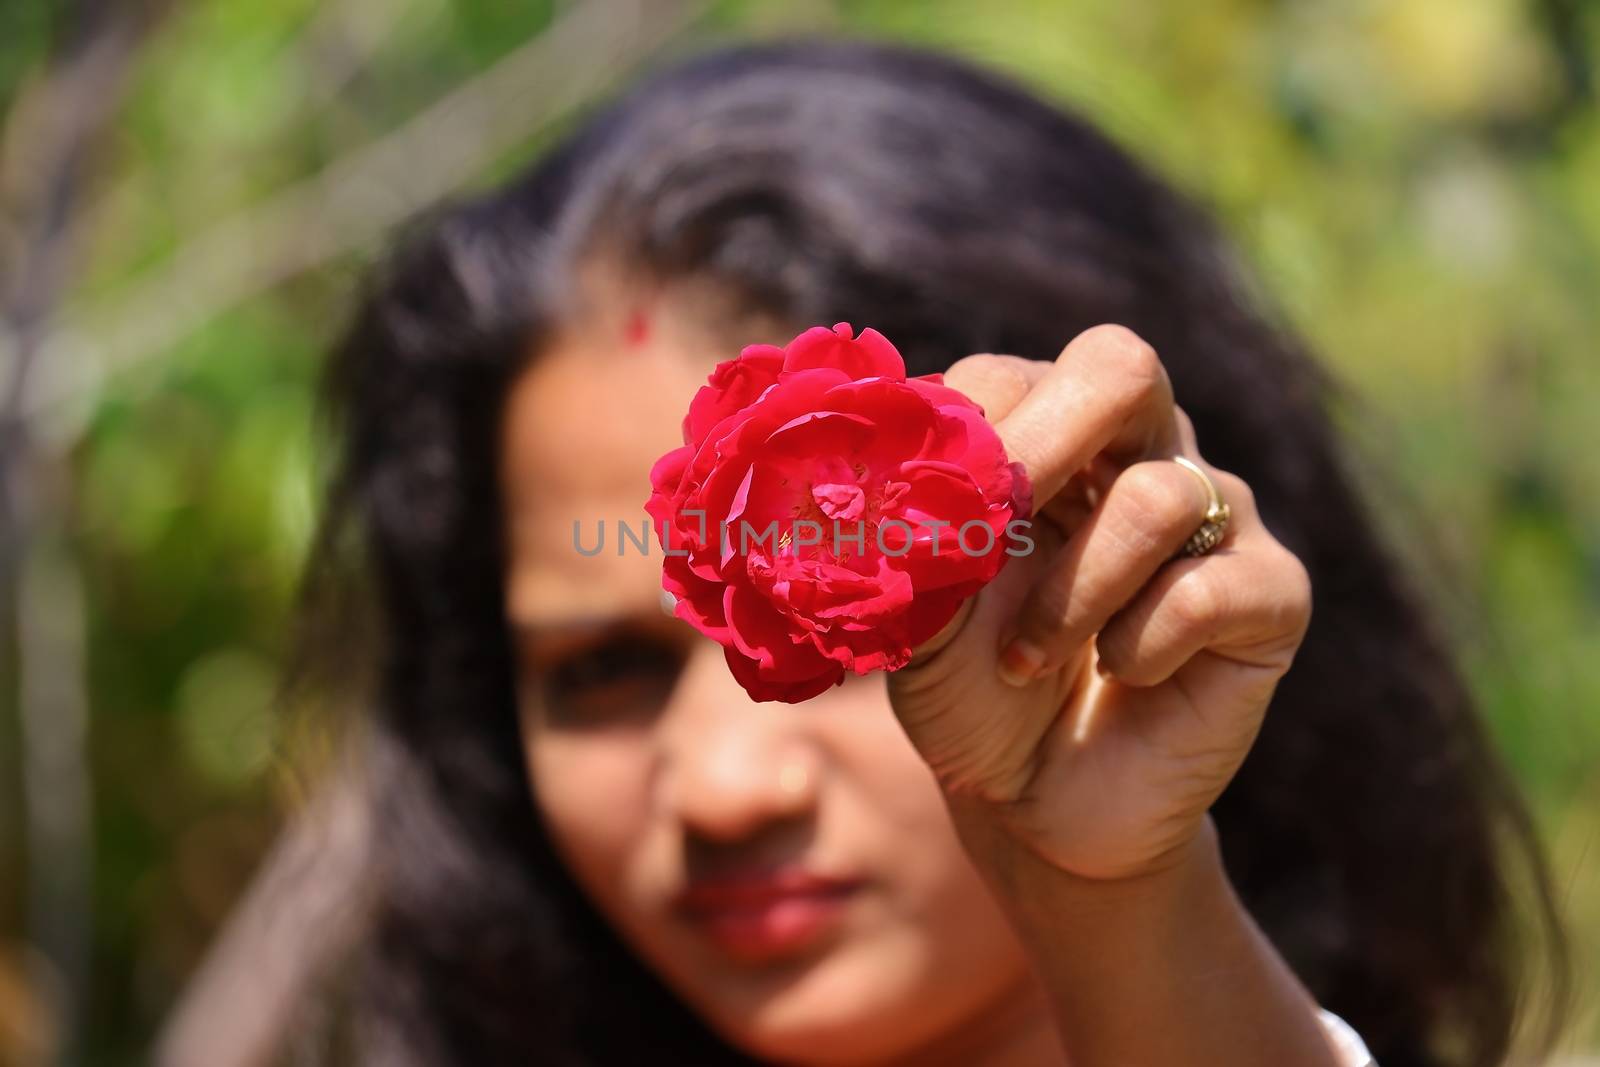 The blurred face of a young girl giving a red rose flower in open hairs